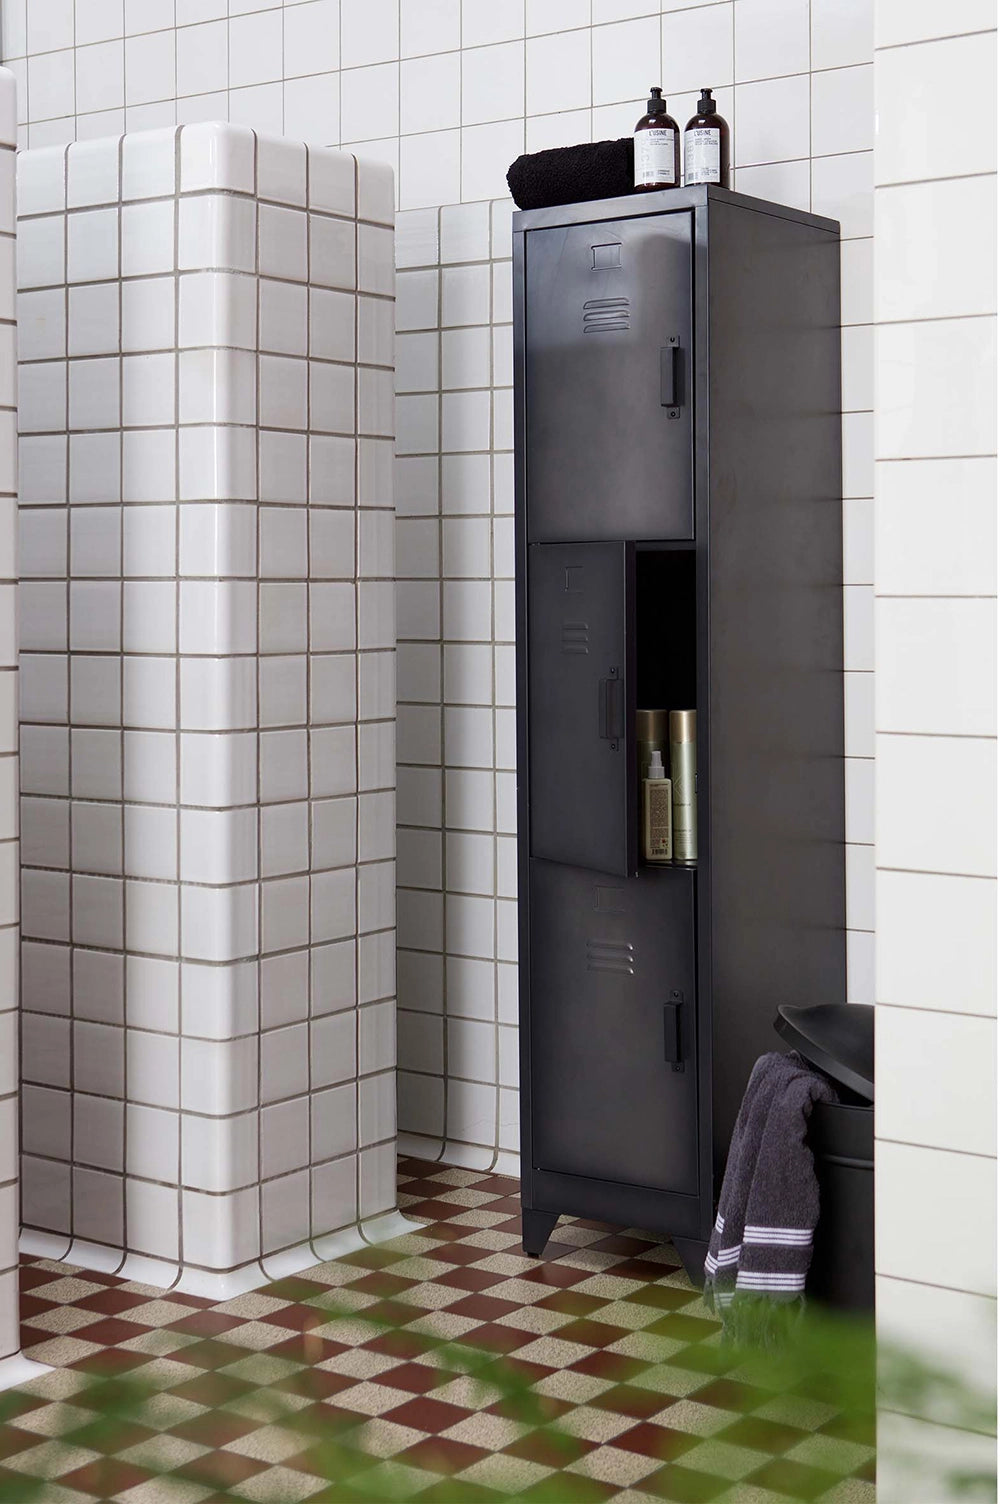 Cassidy Set of 2 Metal Lockers in - Black Finish with Shampoo Bottles and Body Towel in Bathroom Setting